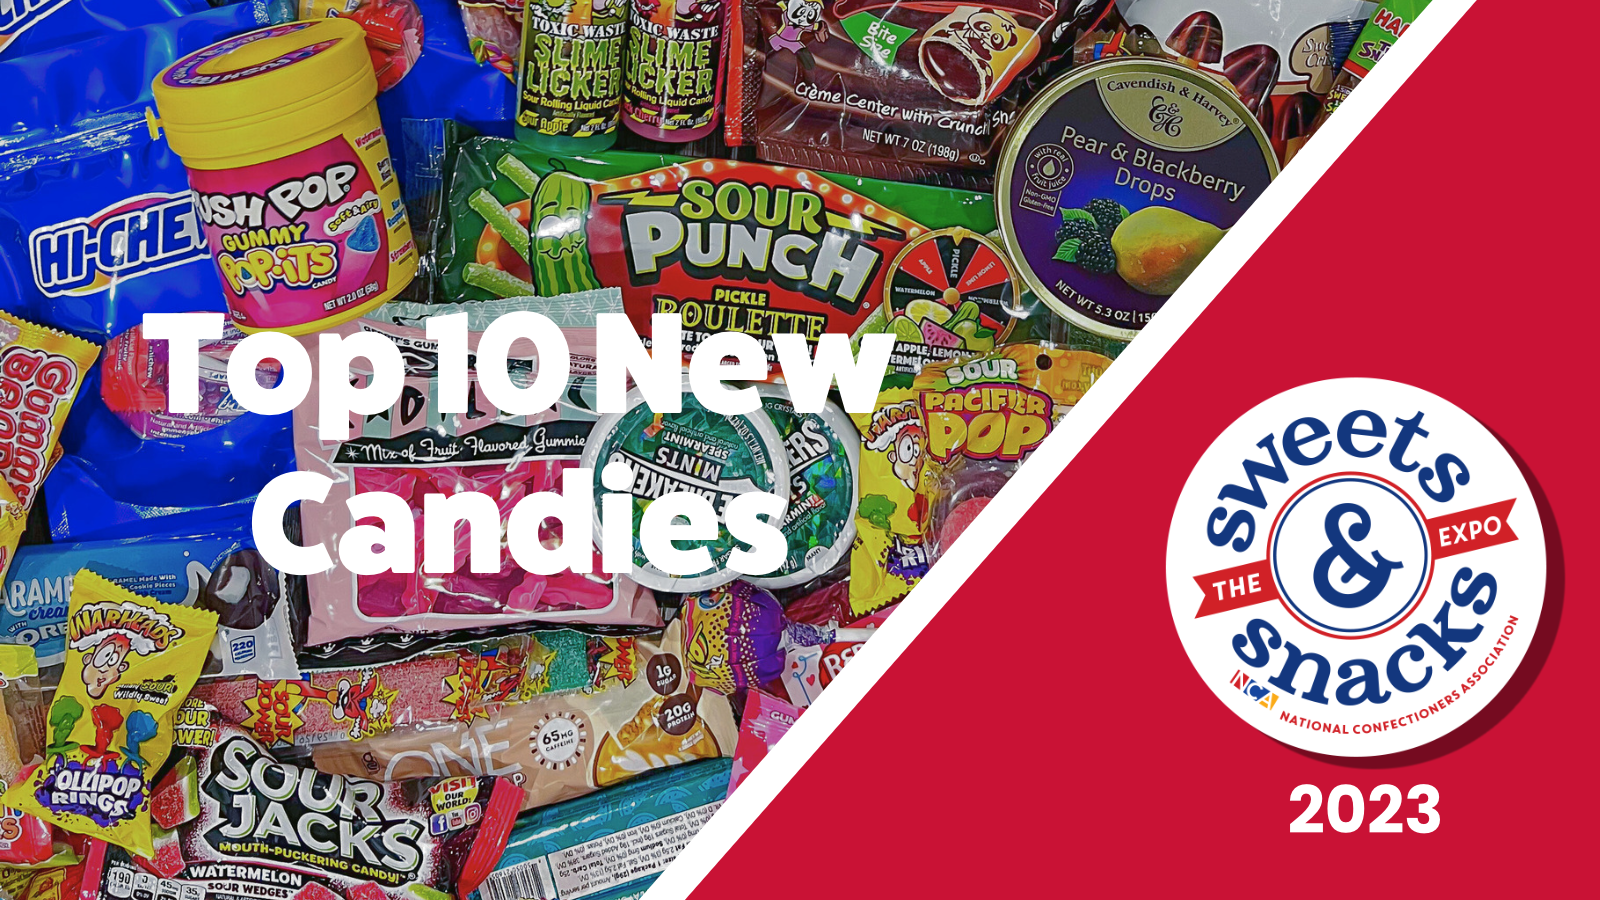 Our Top 10 Candies from the Sweet & Snacks Expo